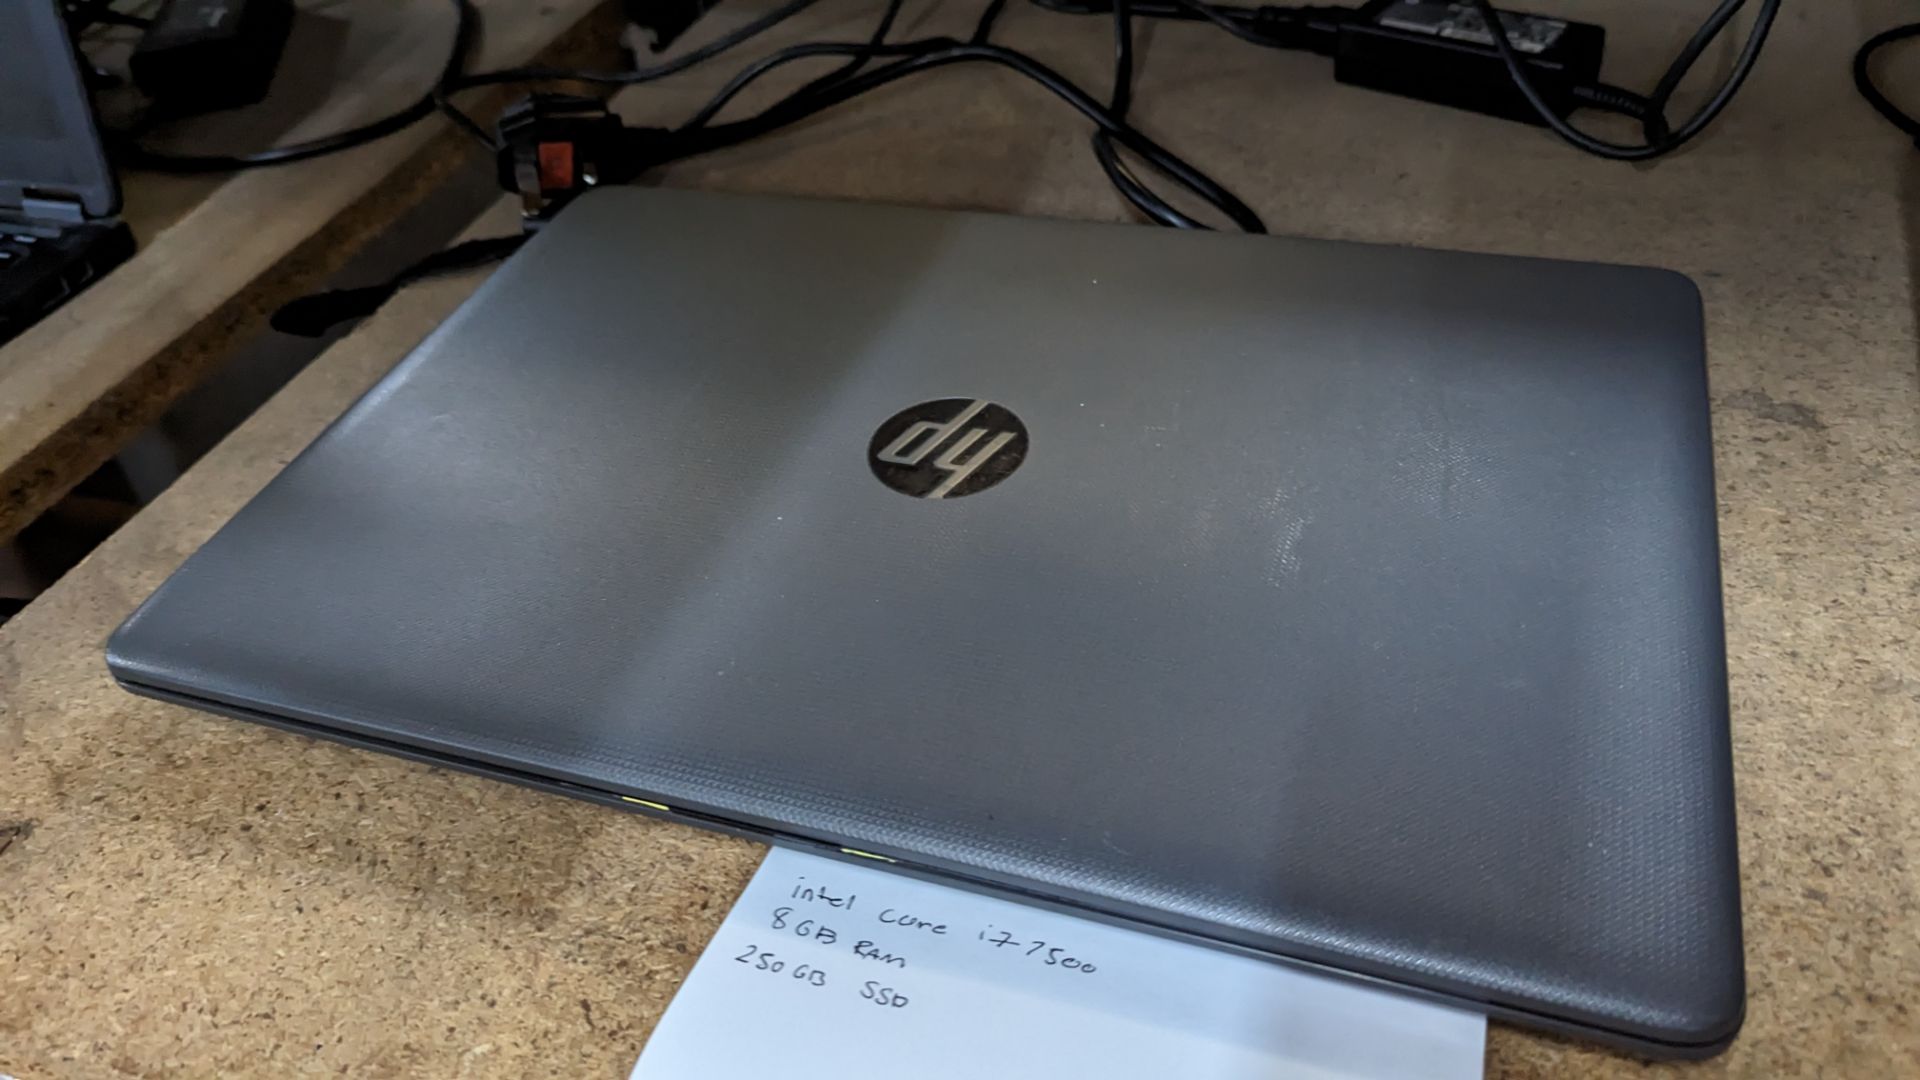 HP 250 notebook computer with Core i7-7500 CPU, 8GB RAM, 250 GB SSD, including power pack/charger - Image 9 of 12